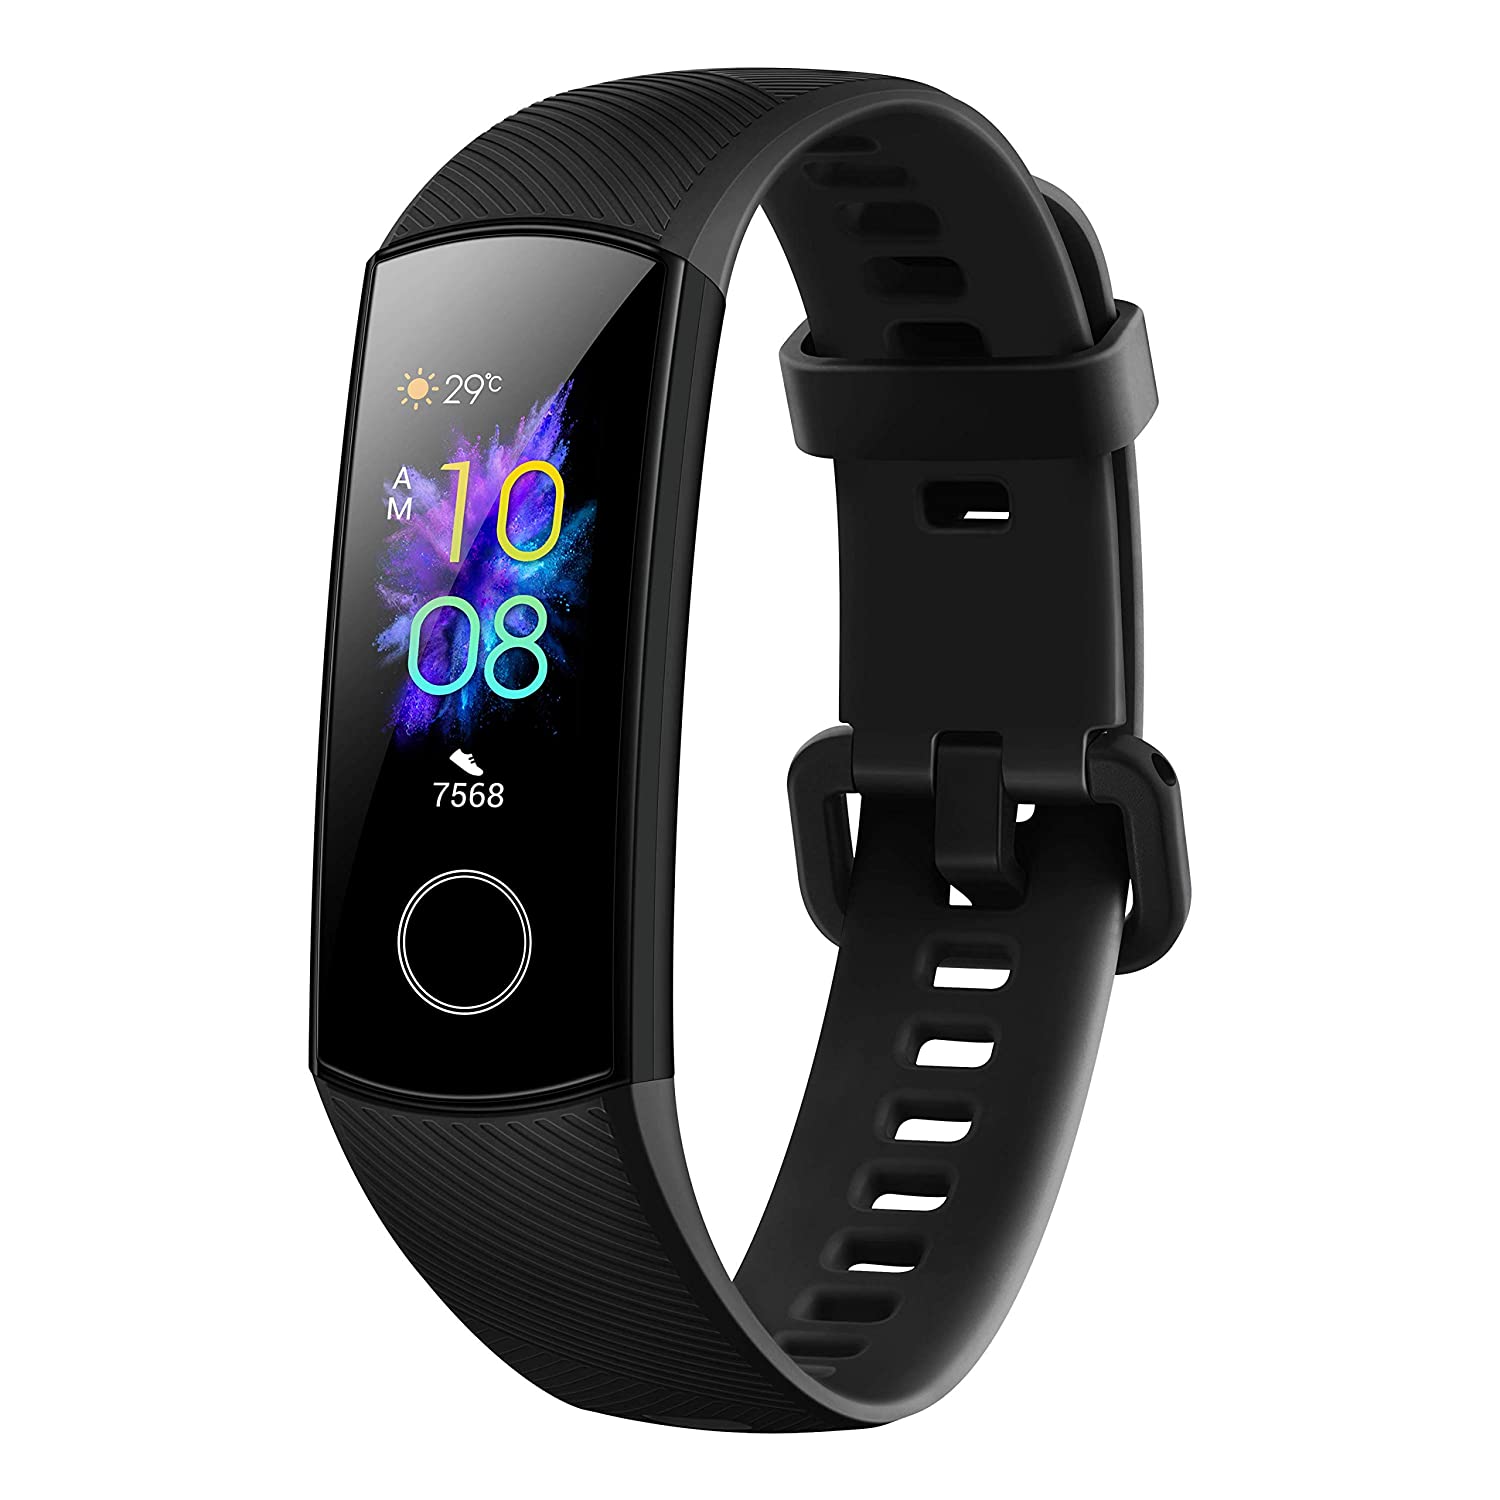 honor band 5 cheapest price